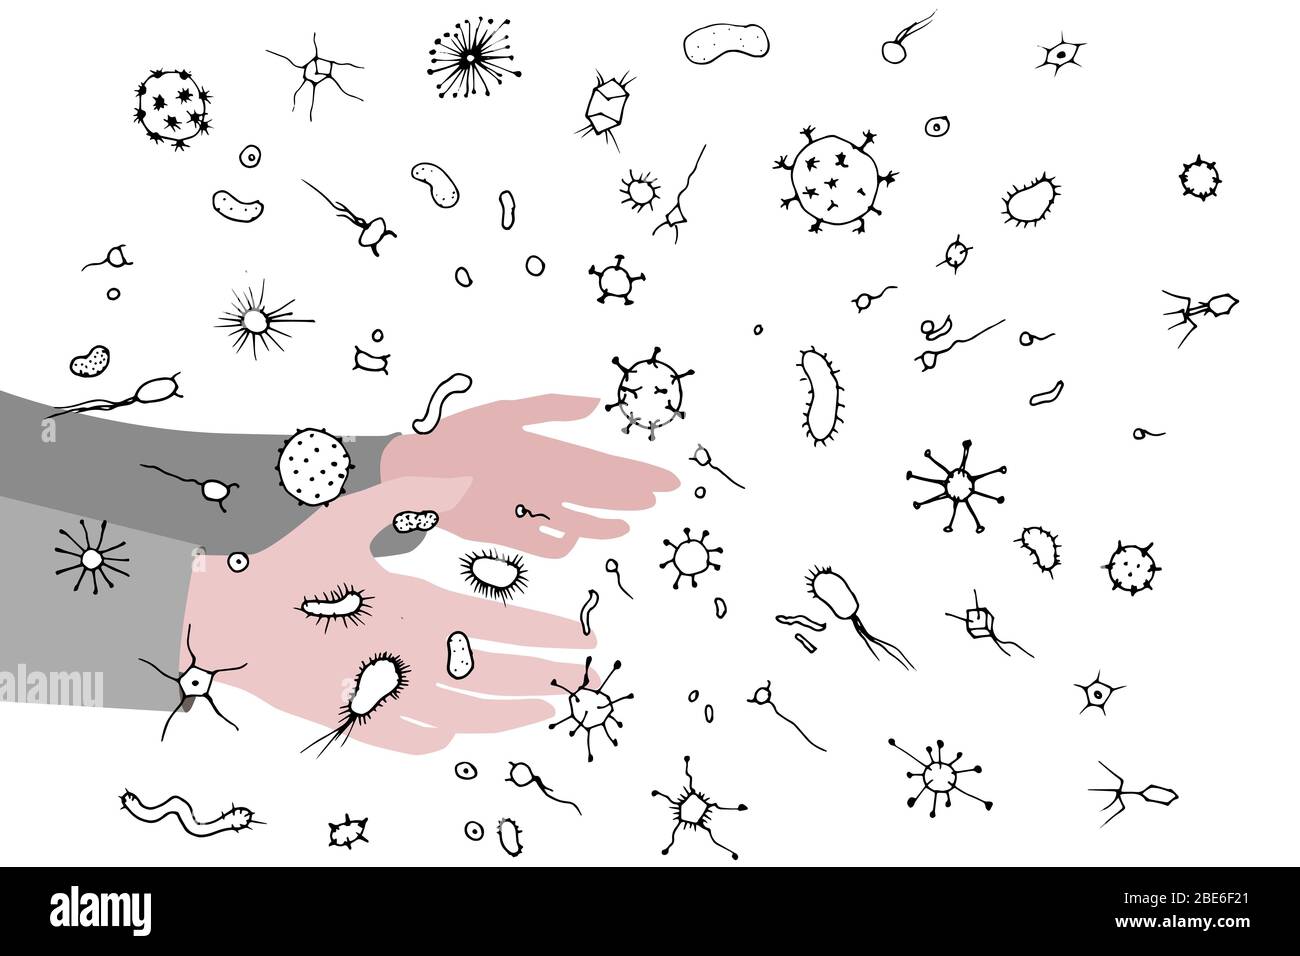 Lots of bacteria and viruses in the air and in particles, virus transfer by airborne droplets, concept. Human hand and various bacteria and viruses. Stock Vector